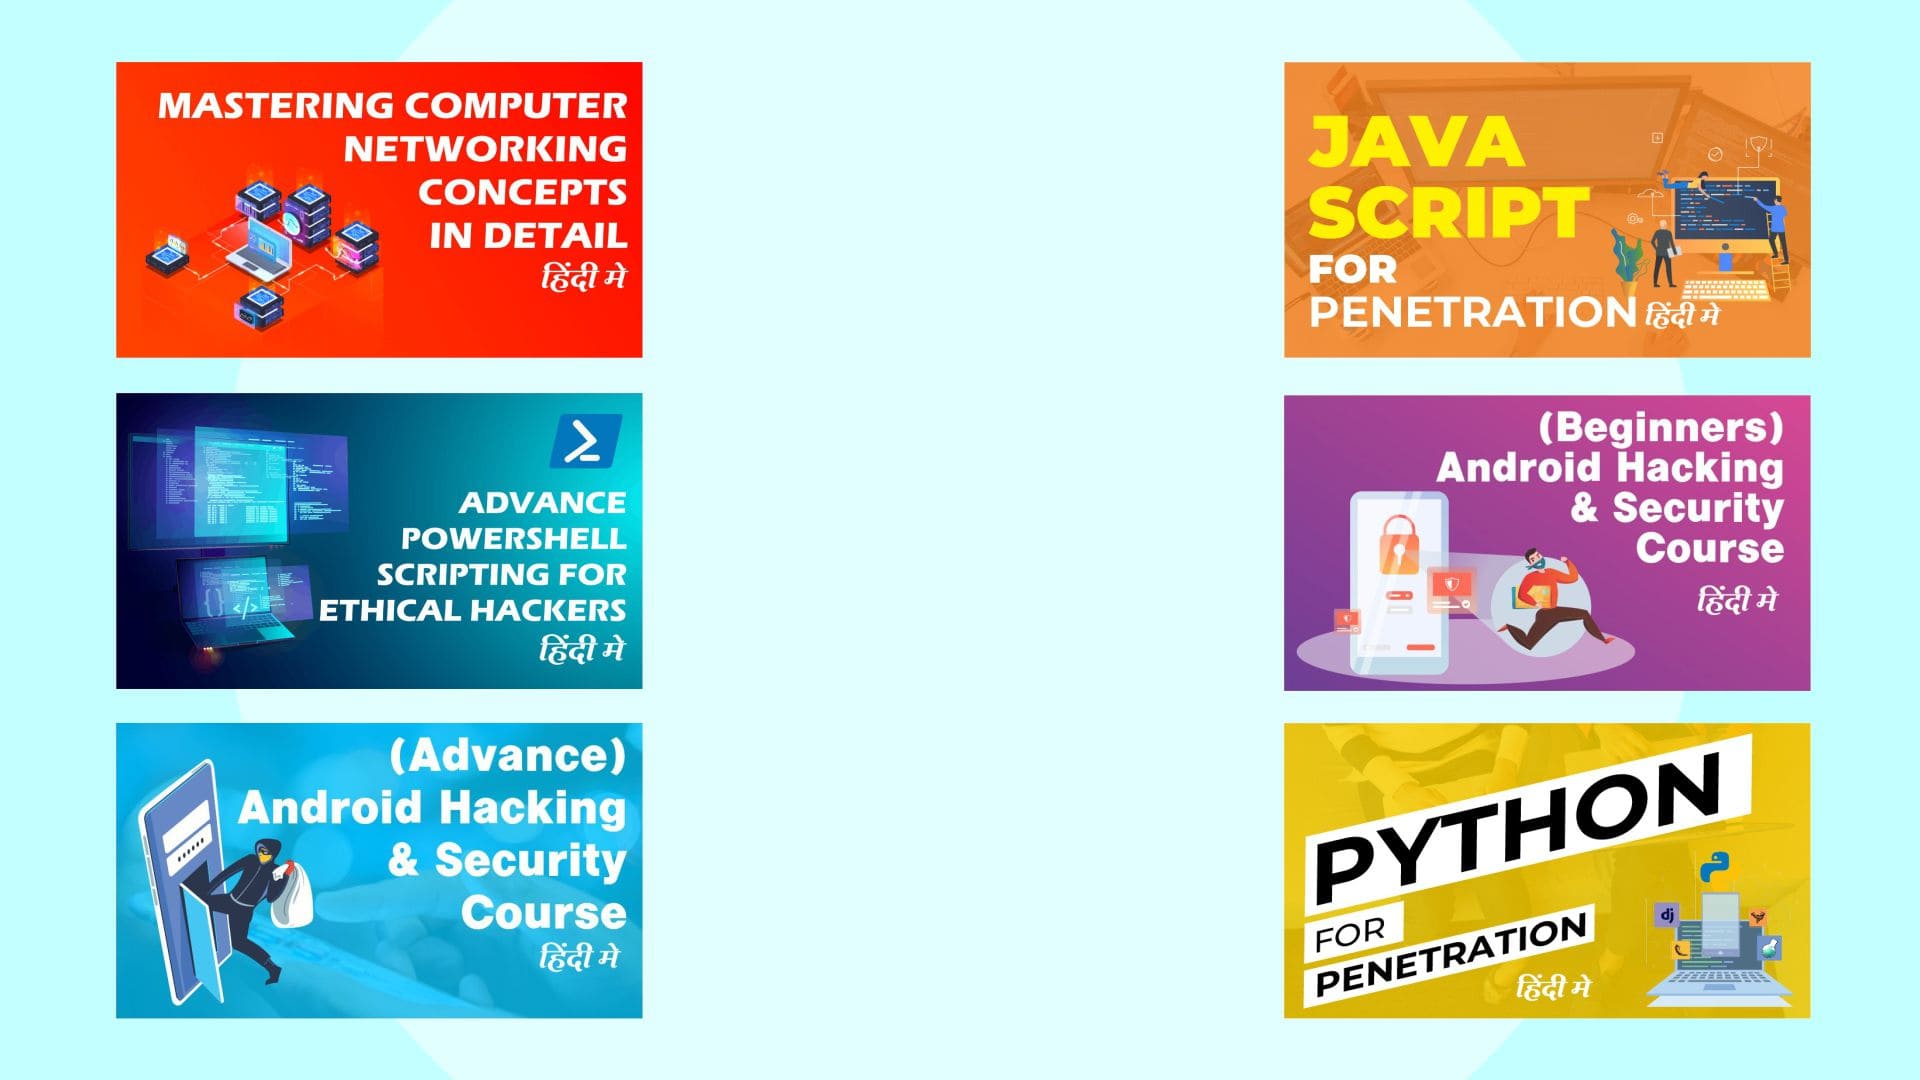 (Beginners) Android Hacking + (Advance) Android Hacking + JavaScript + Python + Networking + Powershell Scripting 